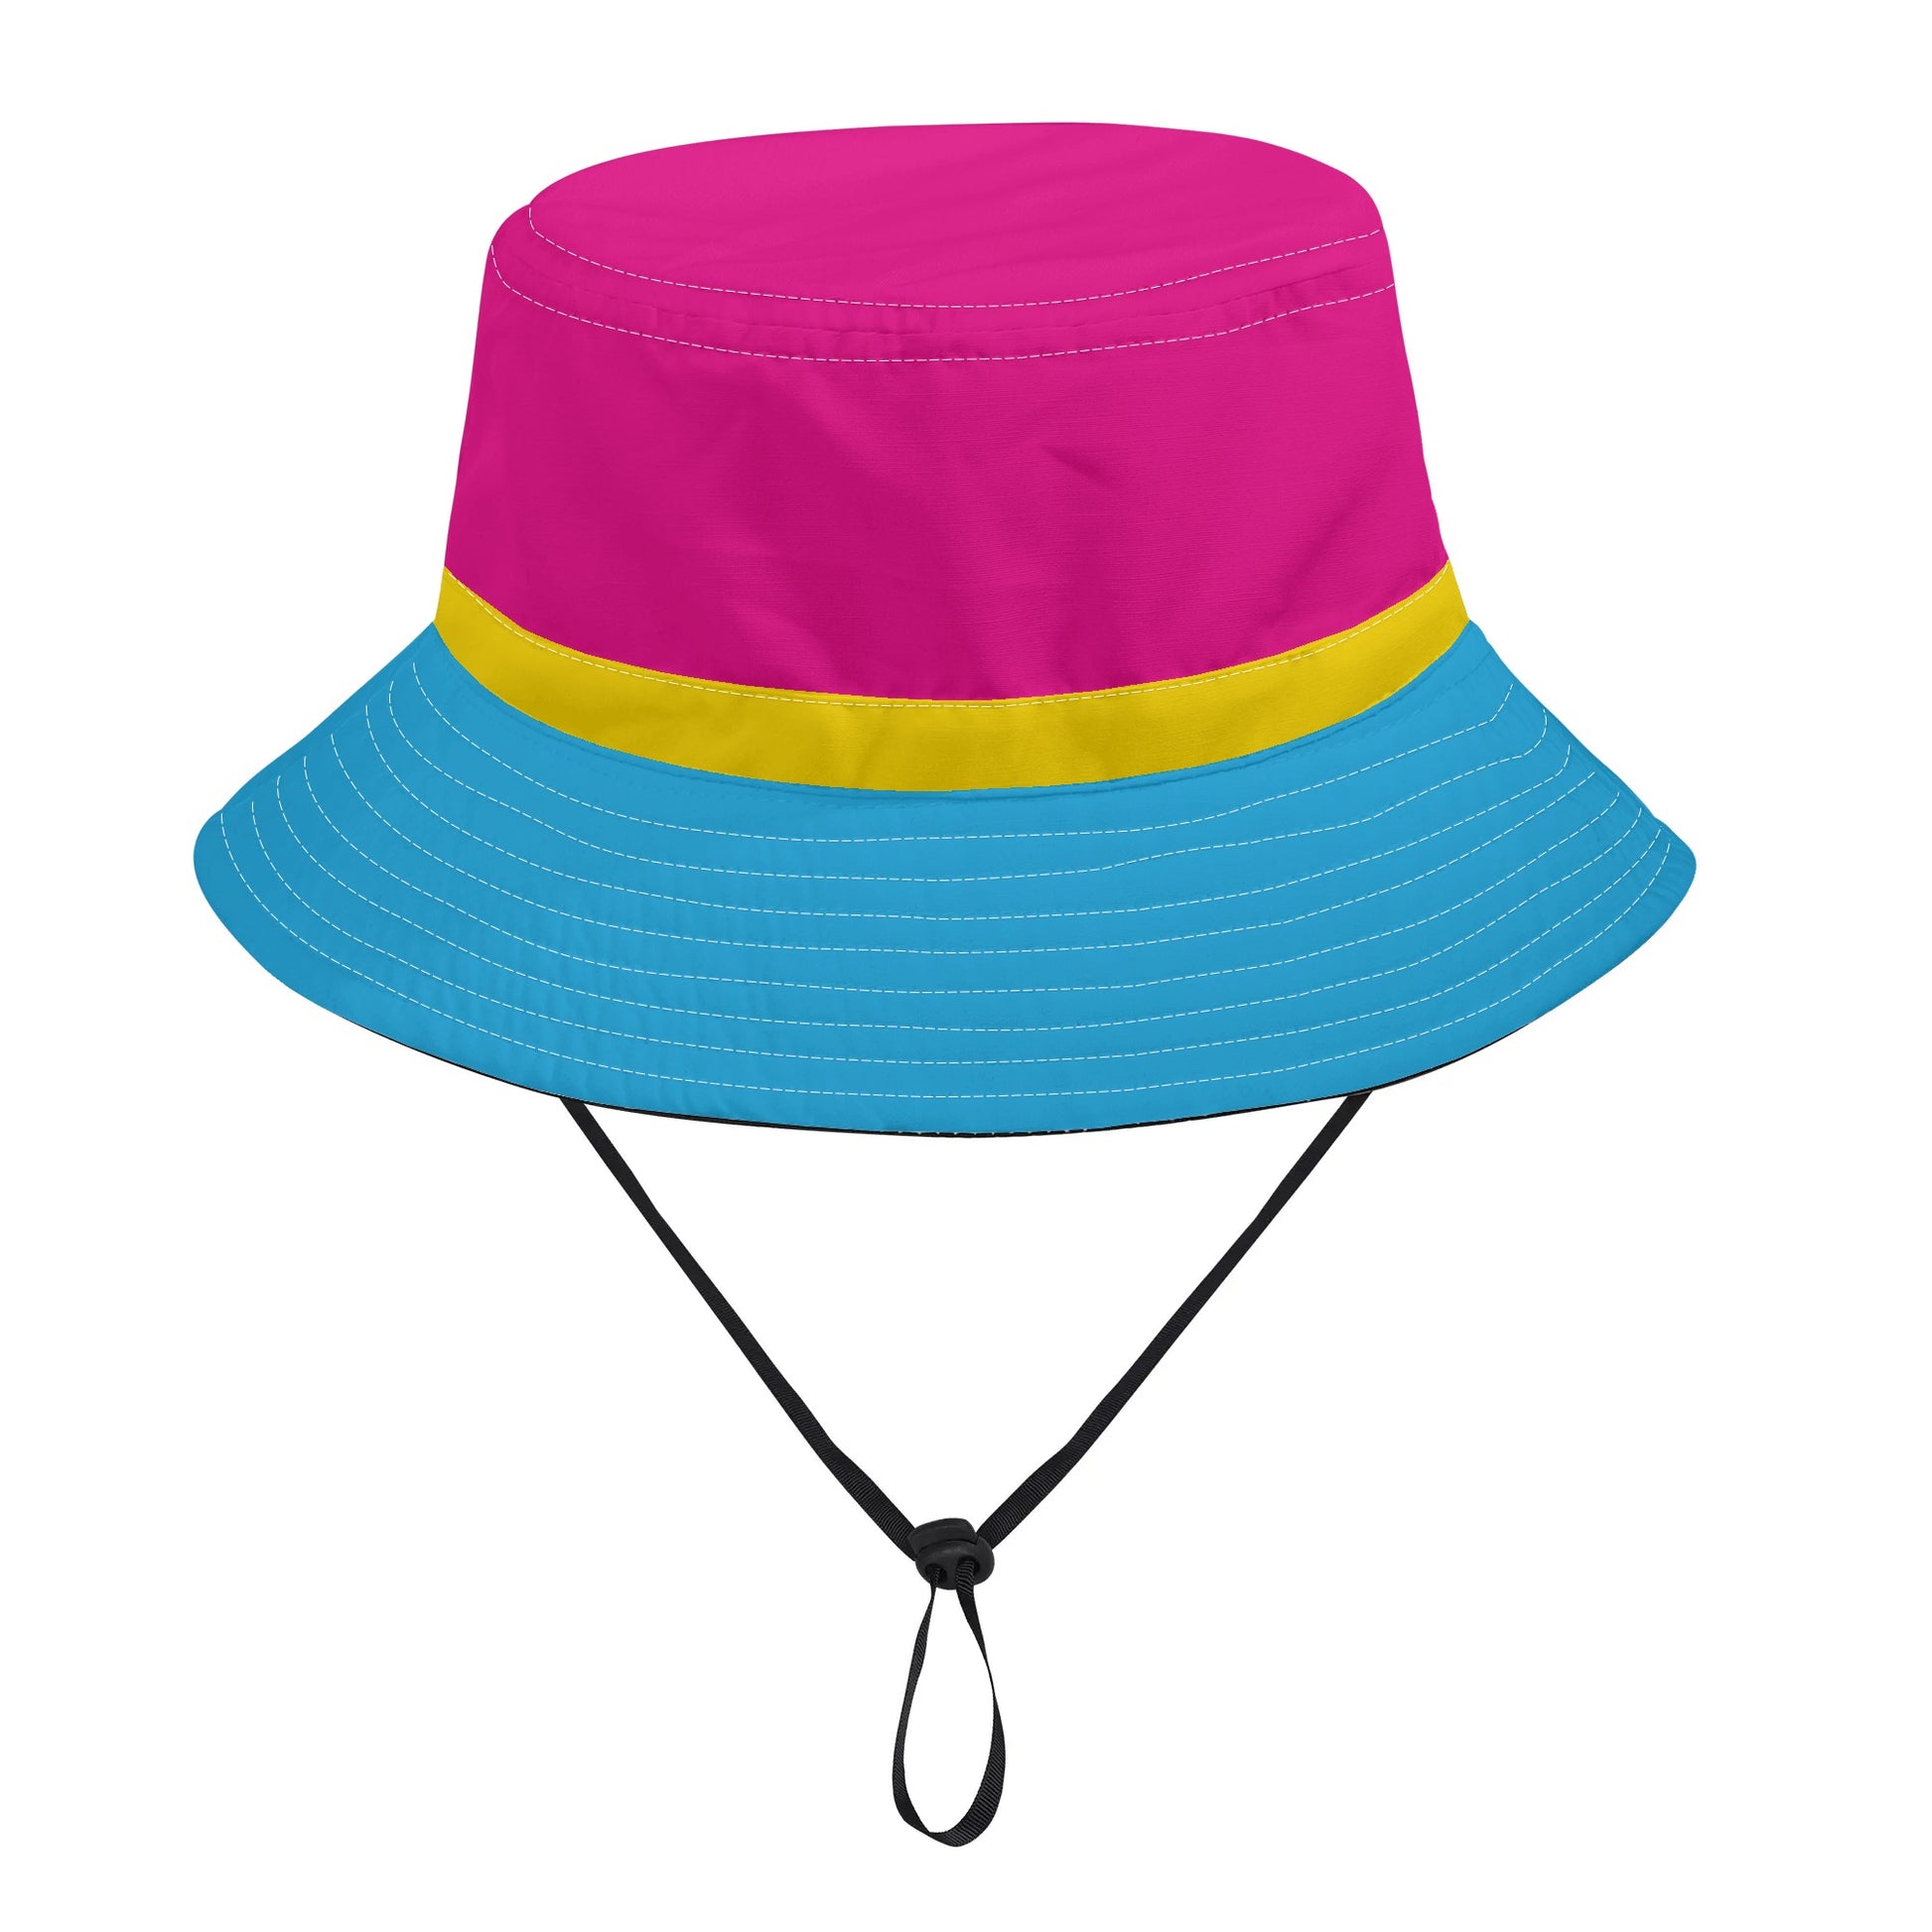 Pansexual pride Flag Bucket Hat with Adjustable String - Rose Gold Co. Shop